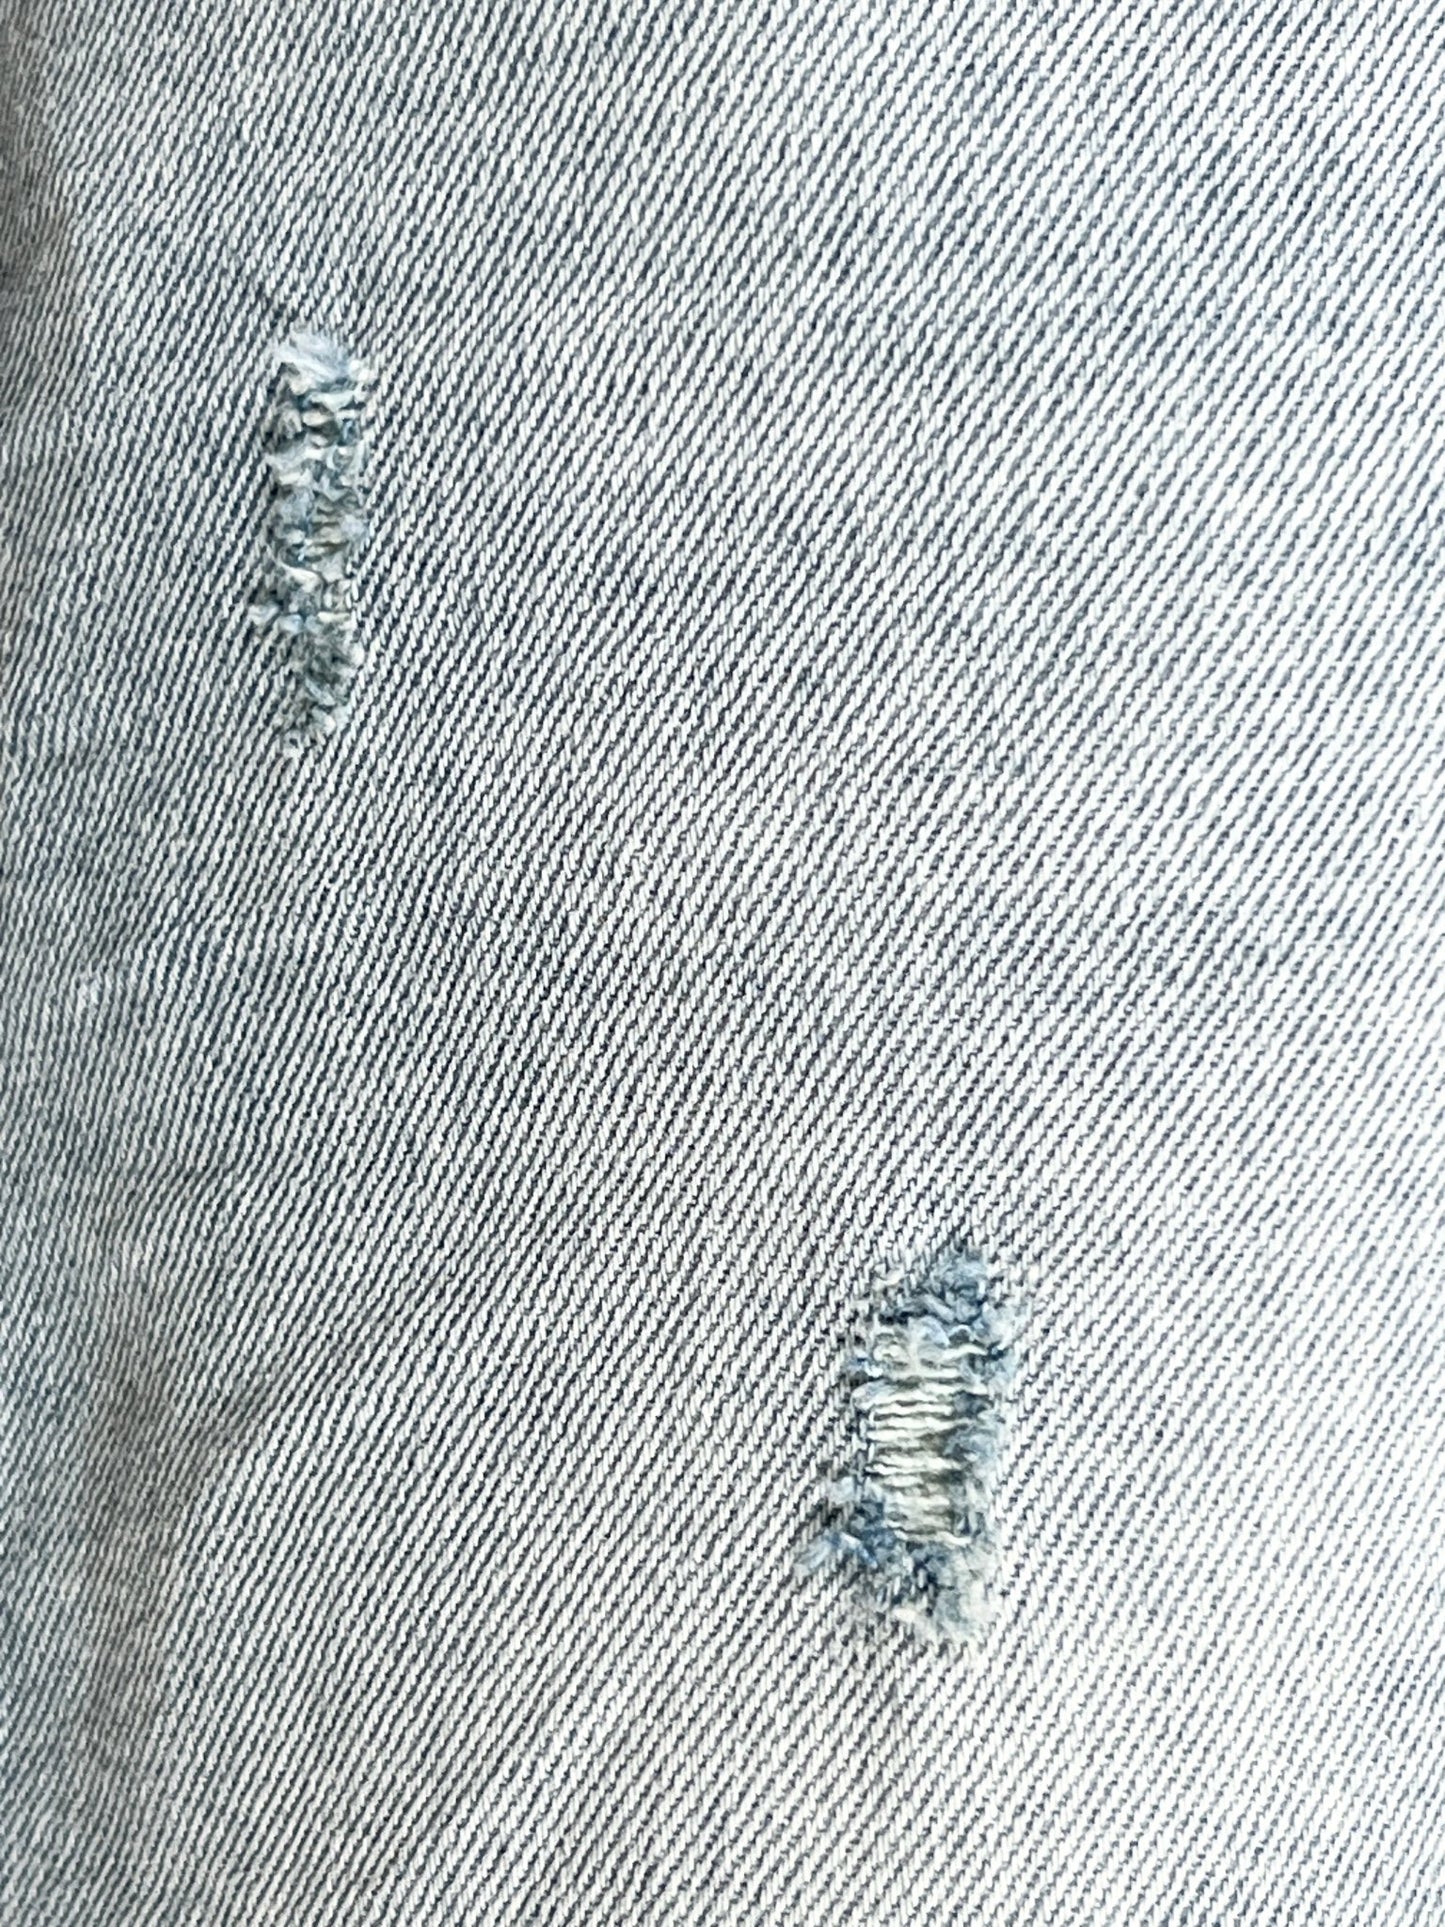 Close-up of a distressed DIESEL stretch denim fabric with frayed holes.